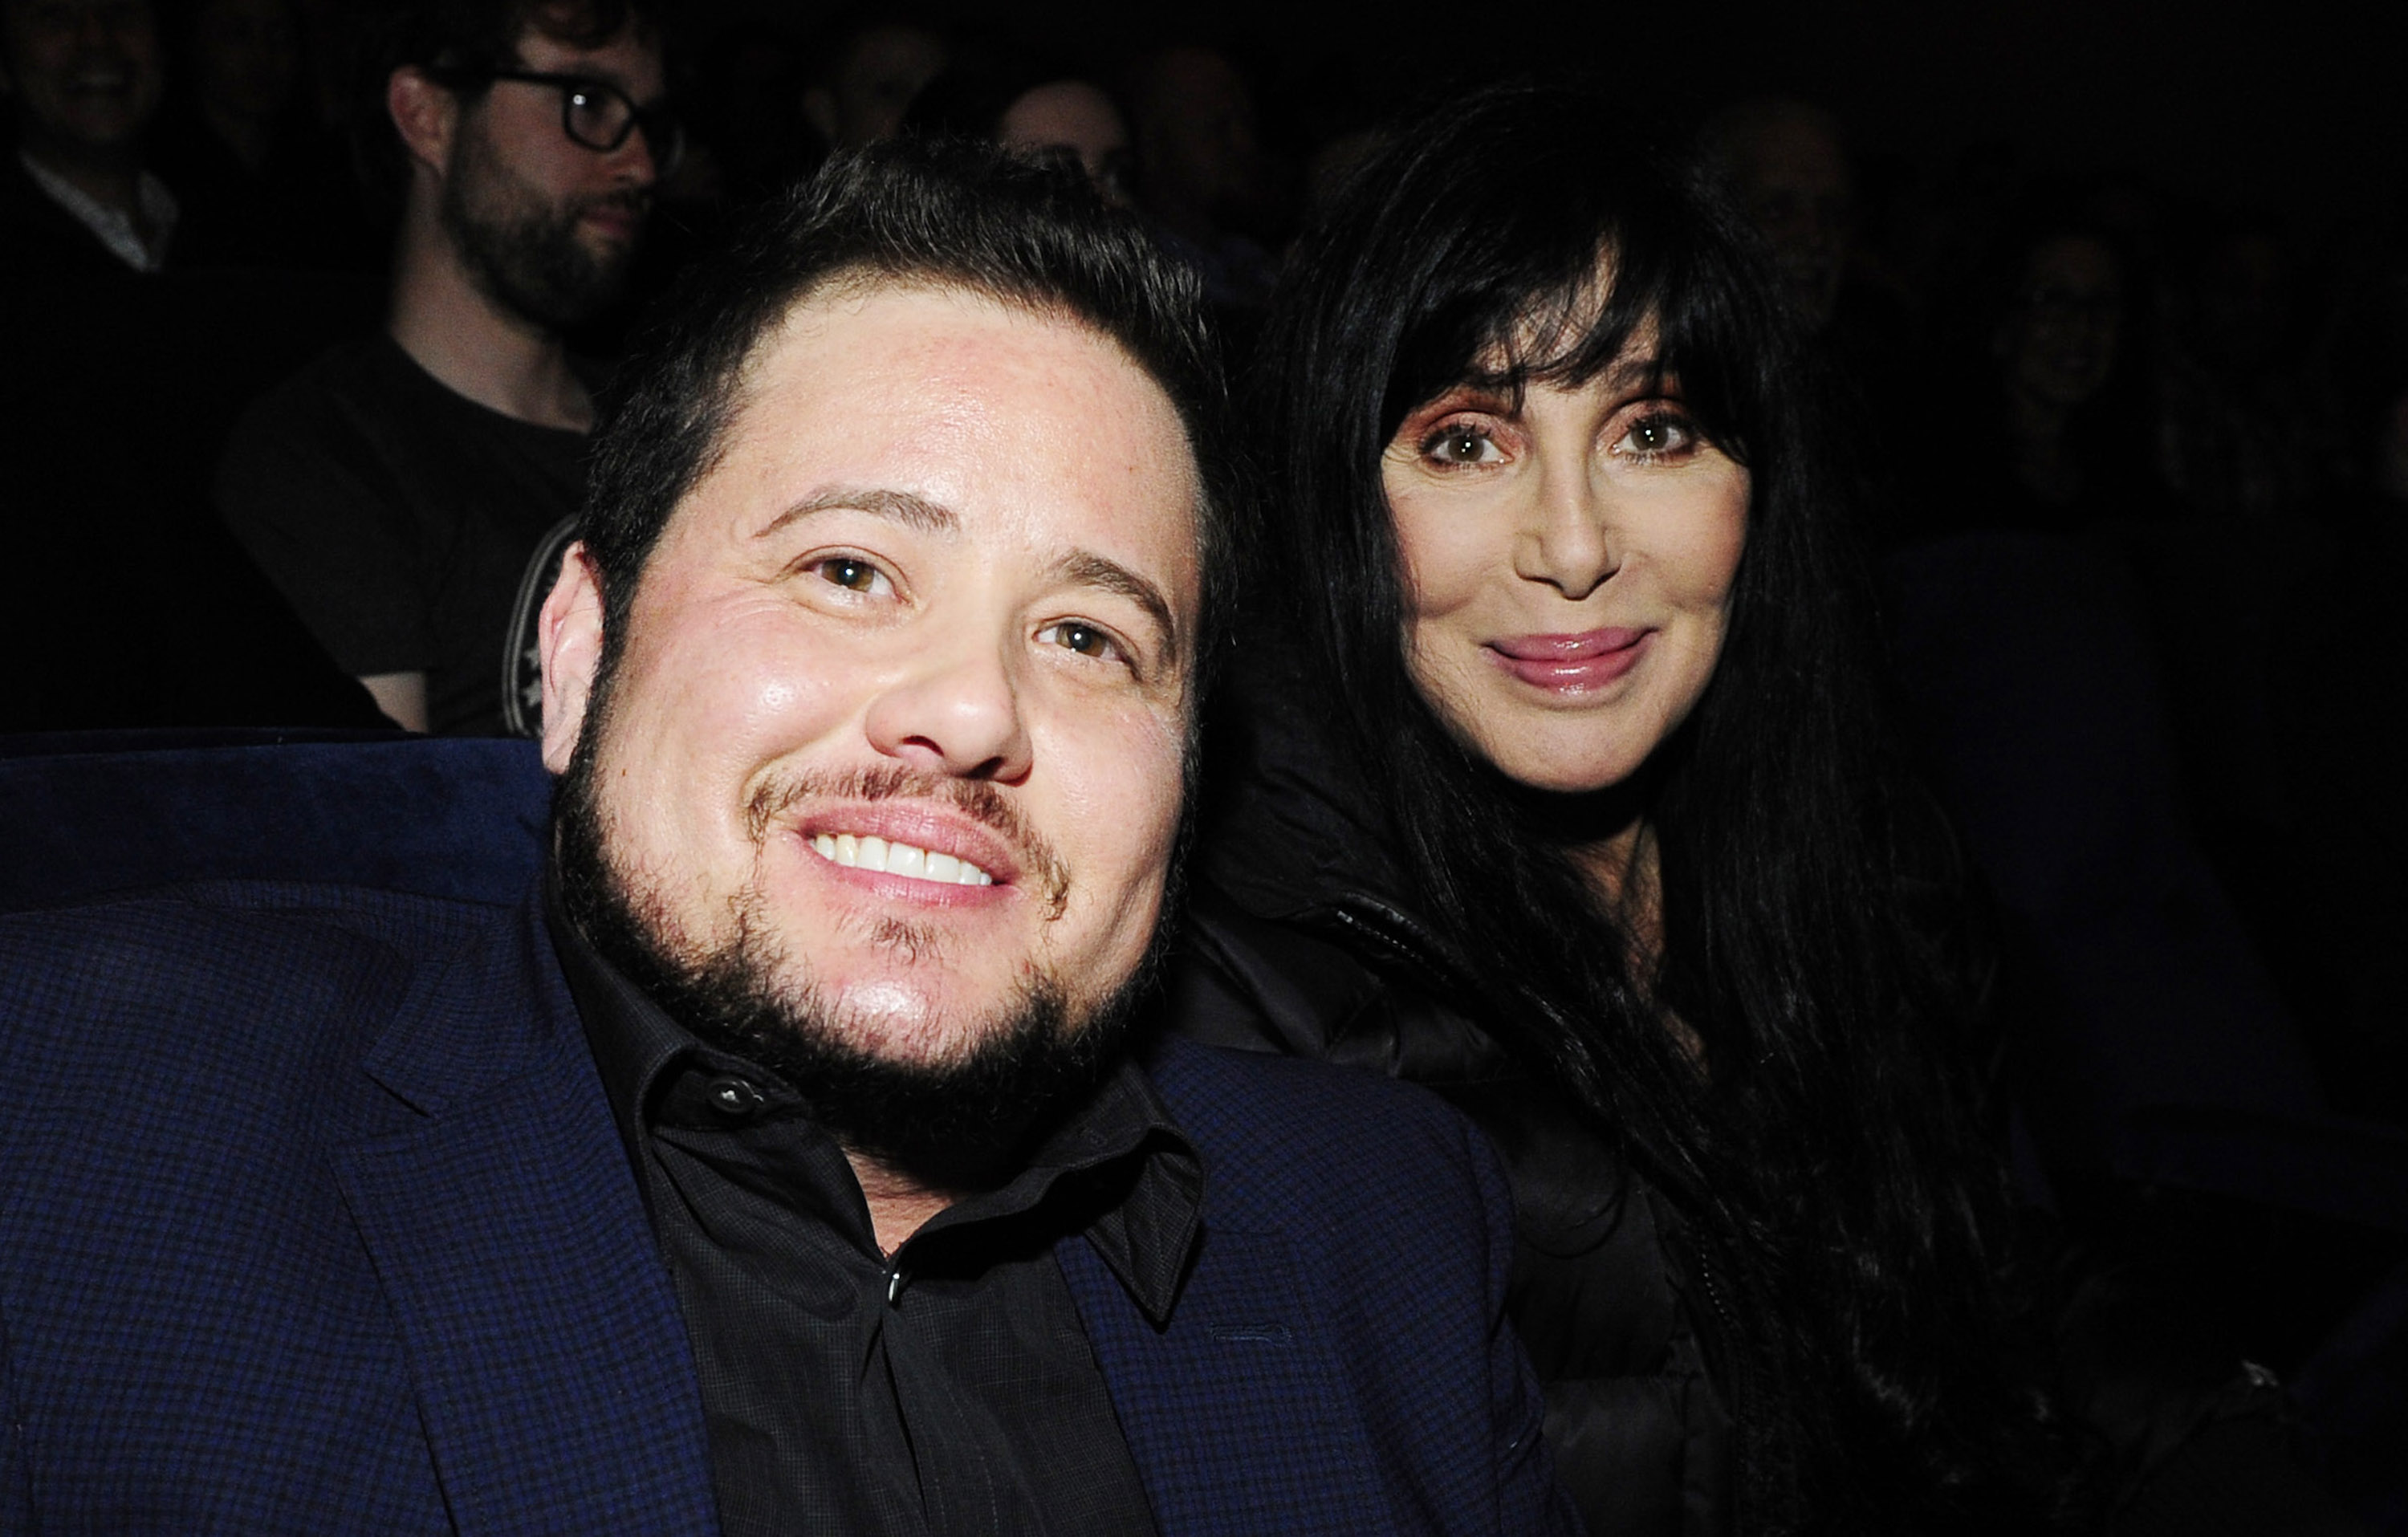 Chaz Bono and Cher attend the Los Angeles Screening of "Dirty" at Writers Guild Theater in Beverly Hills, California, on March 1, 2015. | Source: Getty Images